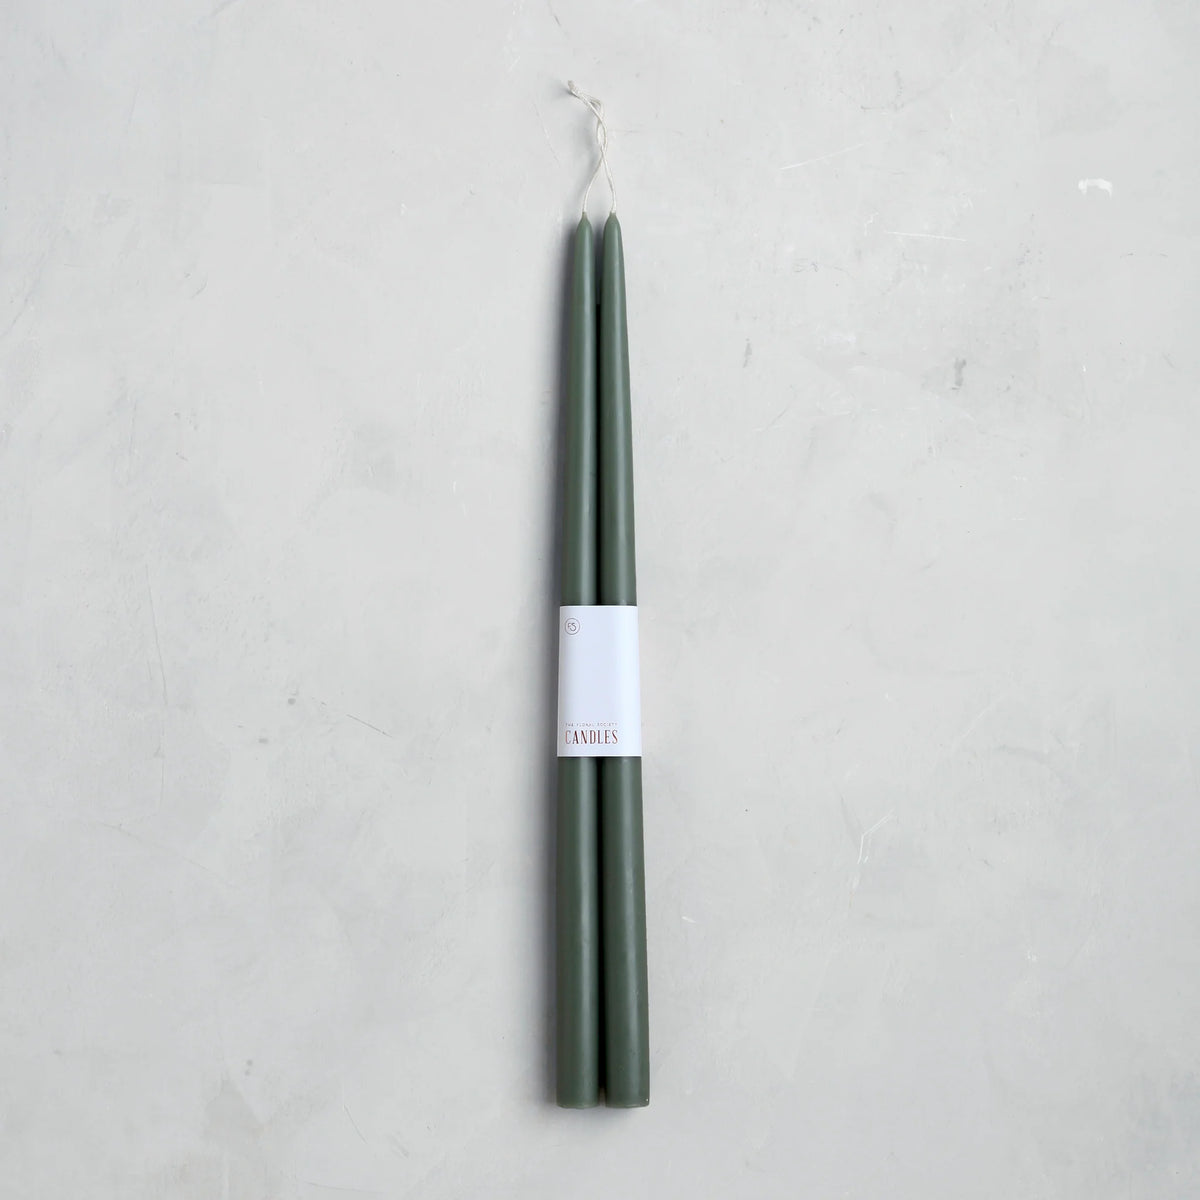 Moss Taper Candles, Set of 2